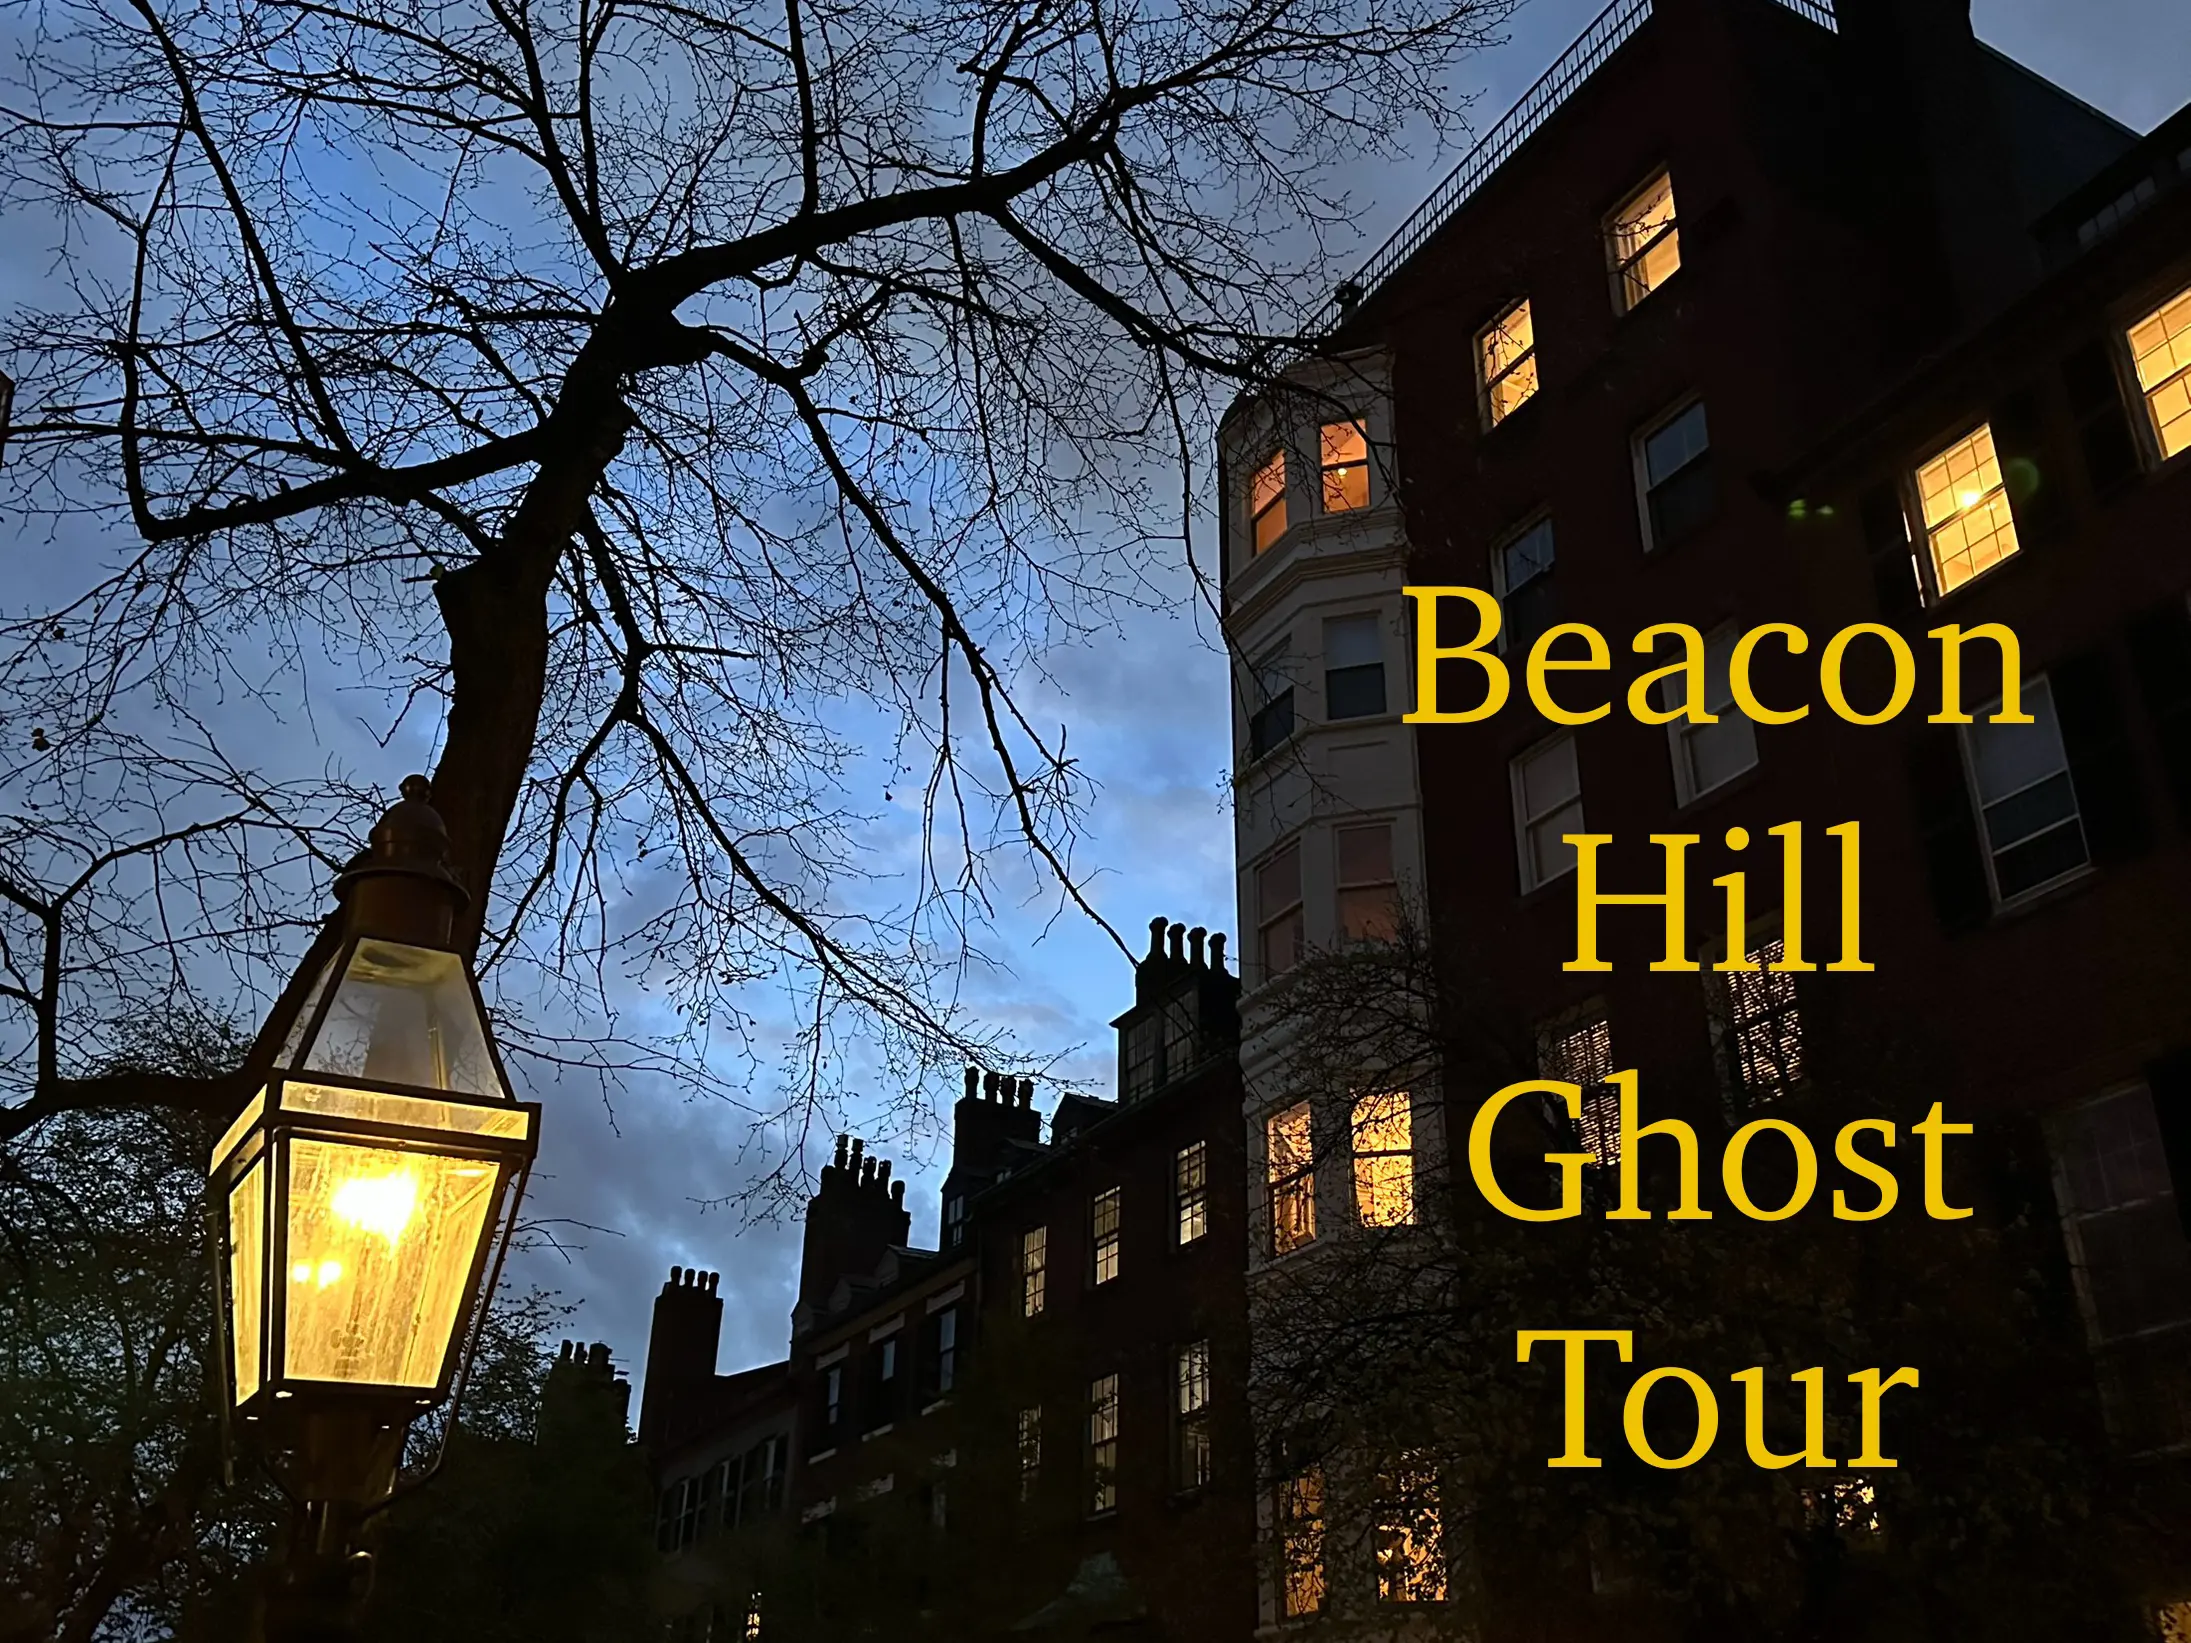 Beacon Hill Ghost Tour